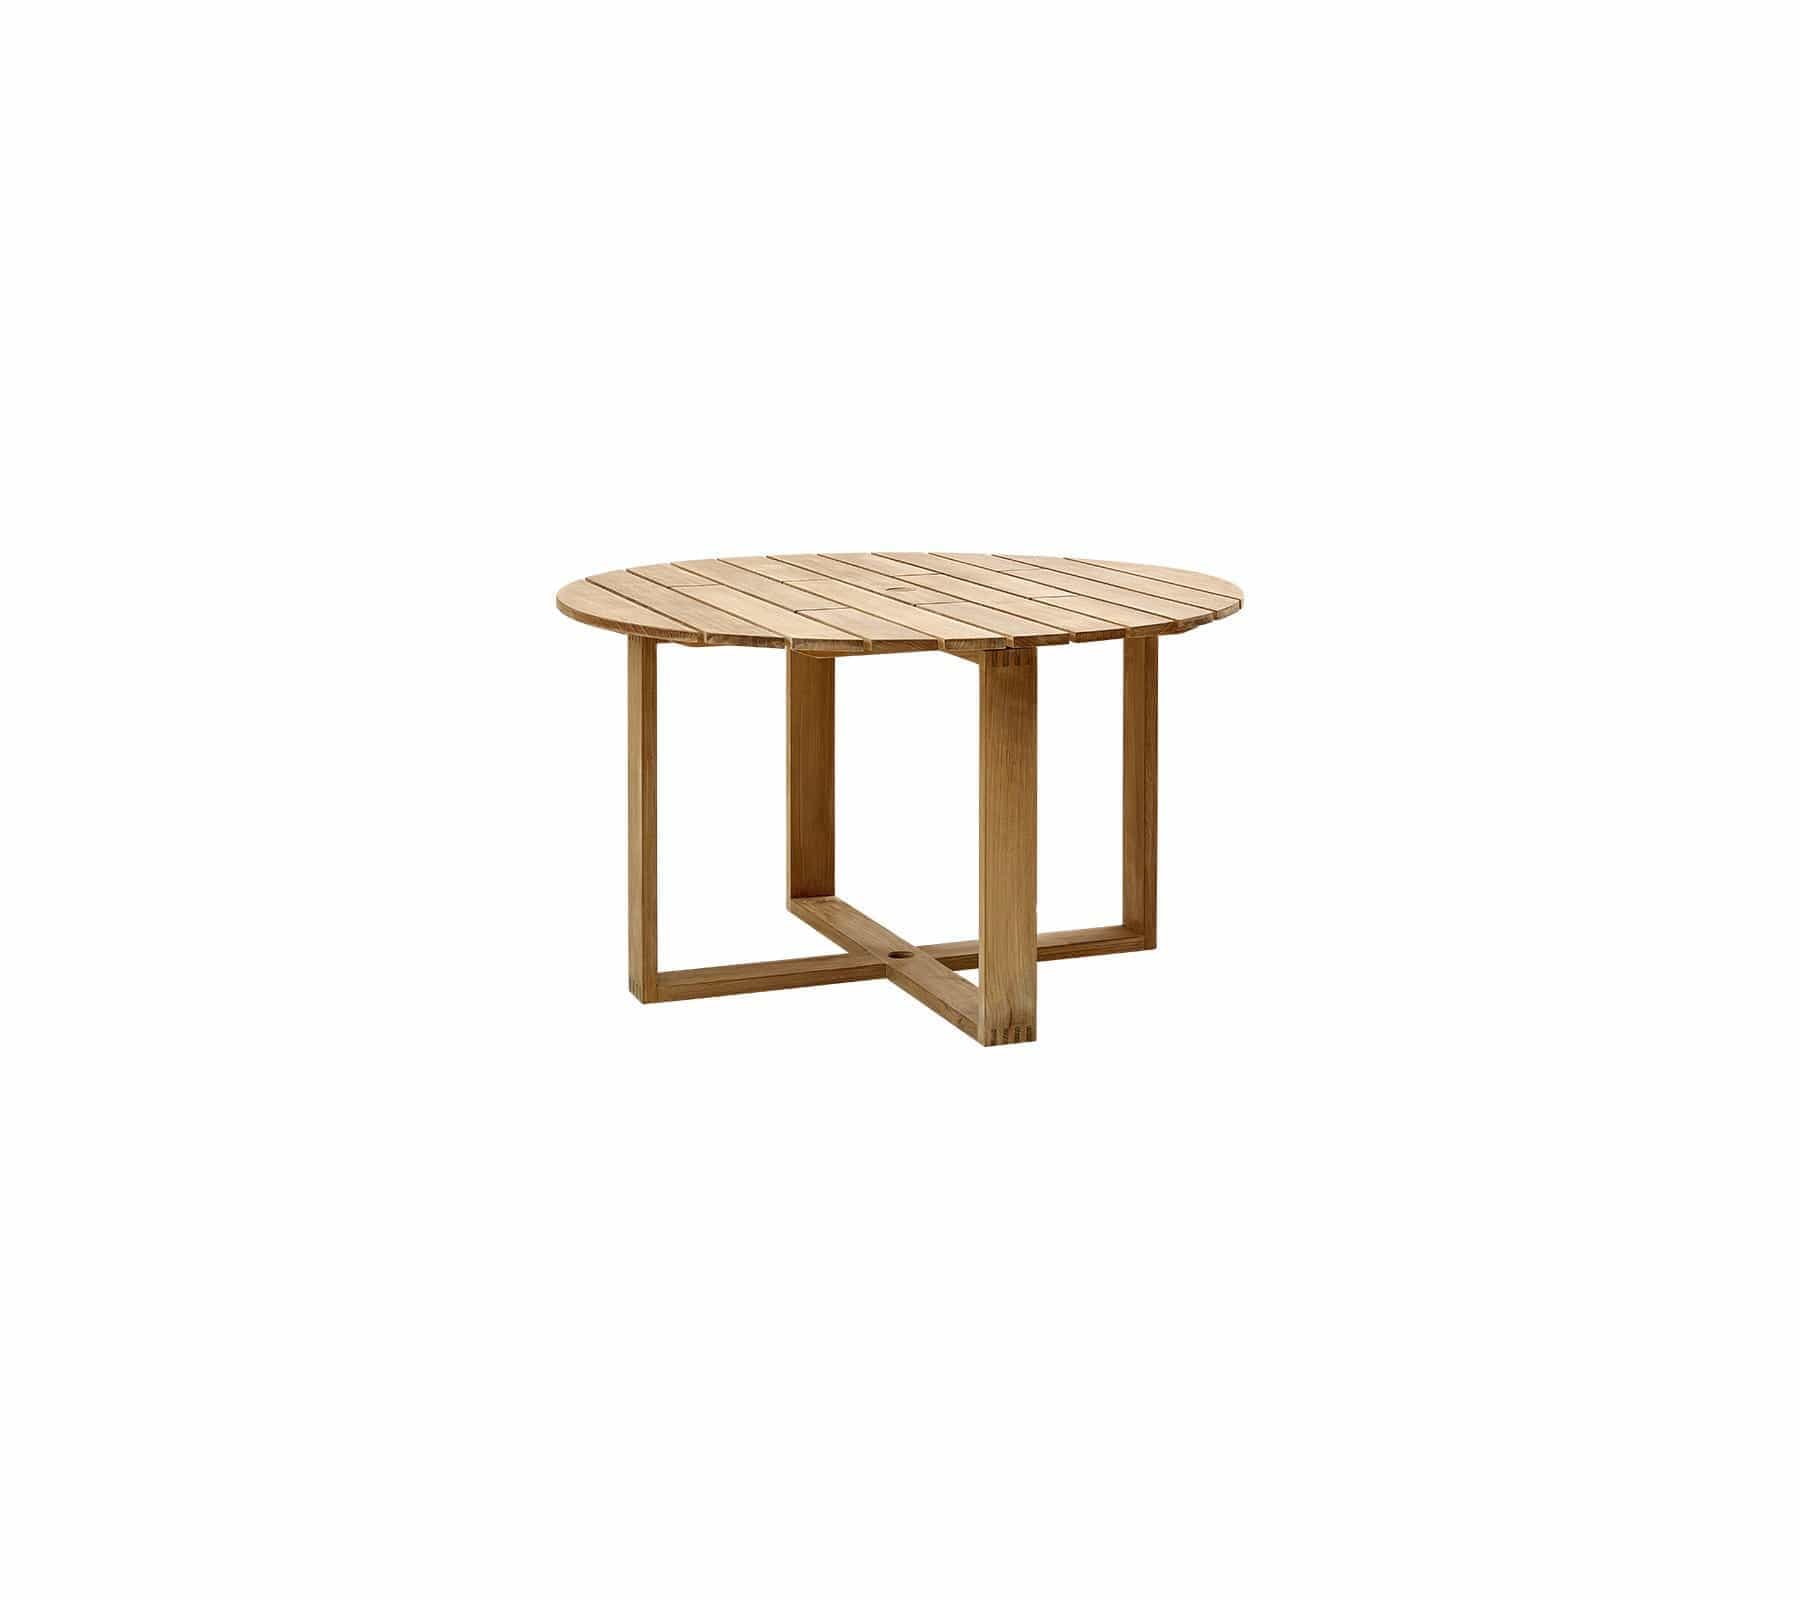 Boxhill's Endless Outdoor Round Dining Table Small in white background